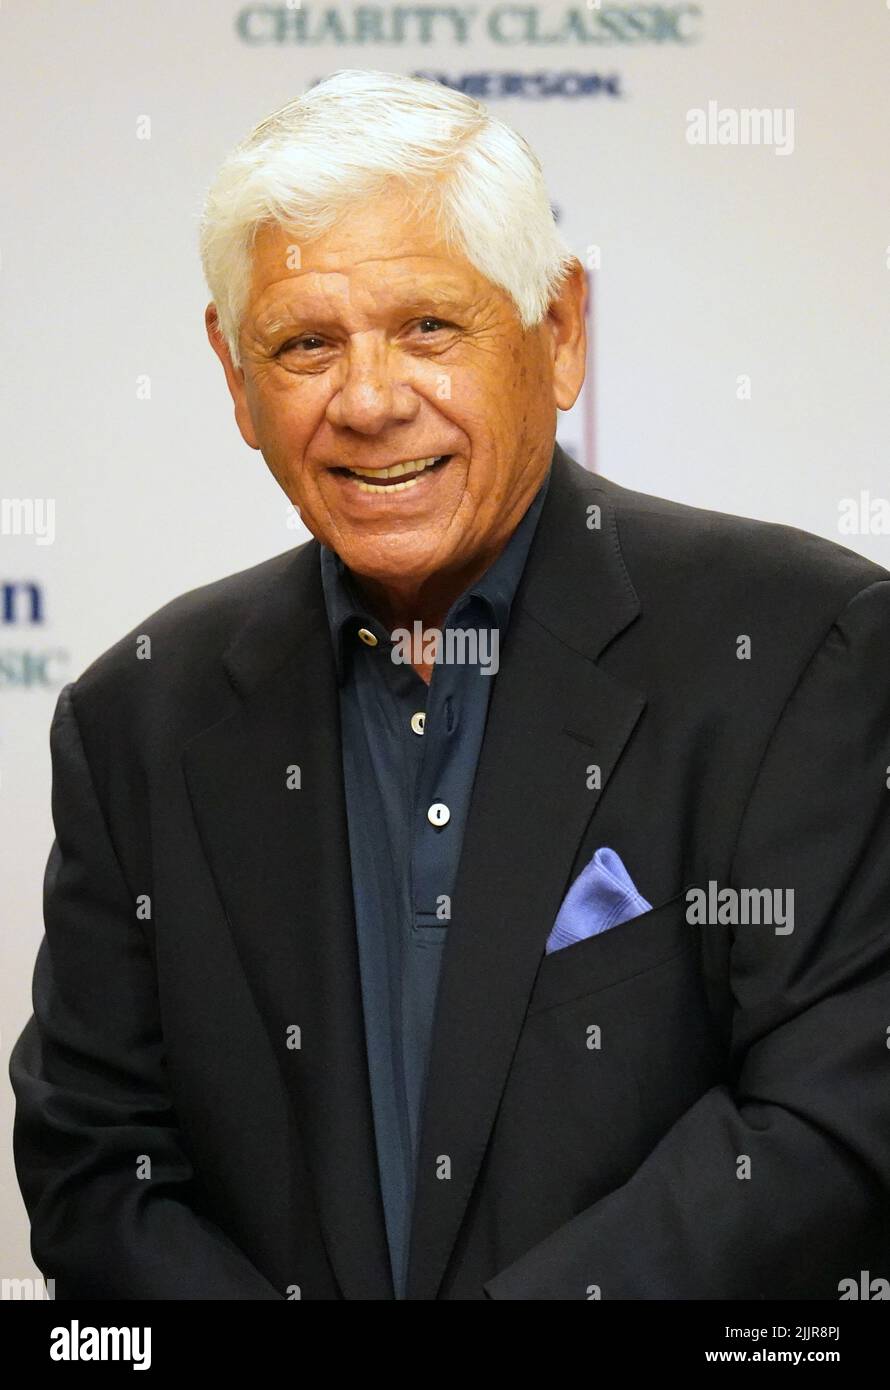 Jenning, United States. 27th July, 2022. Former PGA golfer Lee Trevino talks with reporters during the Ascension Charity Classic Legends Luncheon, at Norwood Hills Country Club in Jennings, Missouri on July 27, 2022. The Ascension Charity Classic is an official PGA TOUR Champions event to be played in September.The 54-hole stroke play golf tournament features 81 PGA TOUR Champions professionals competing for a $2 million purse at Norwood Hills Country Club in St. Louis. Photo by Bill Greenblatt/UPI Credit: UPI/Alamy Live News Stock Photo